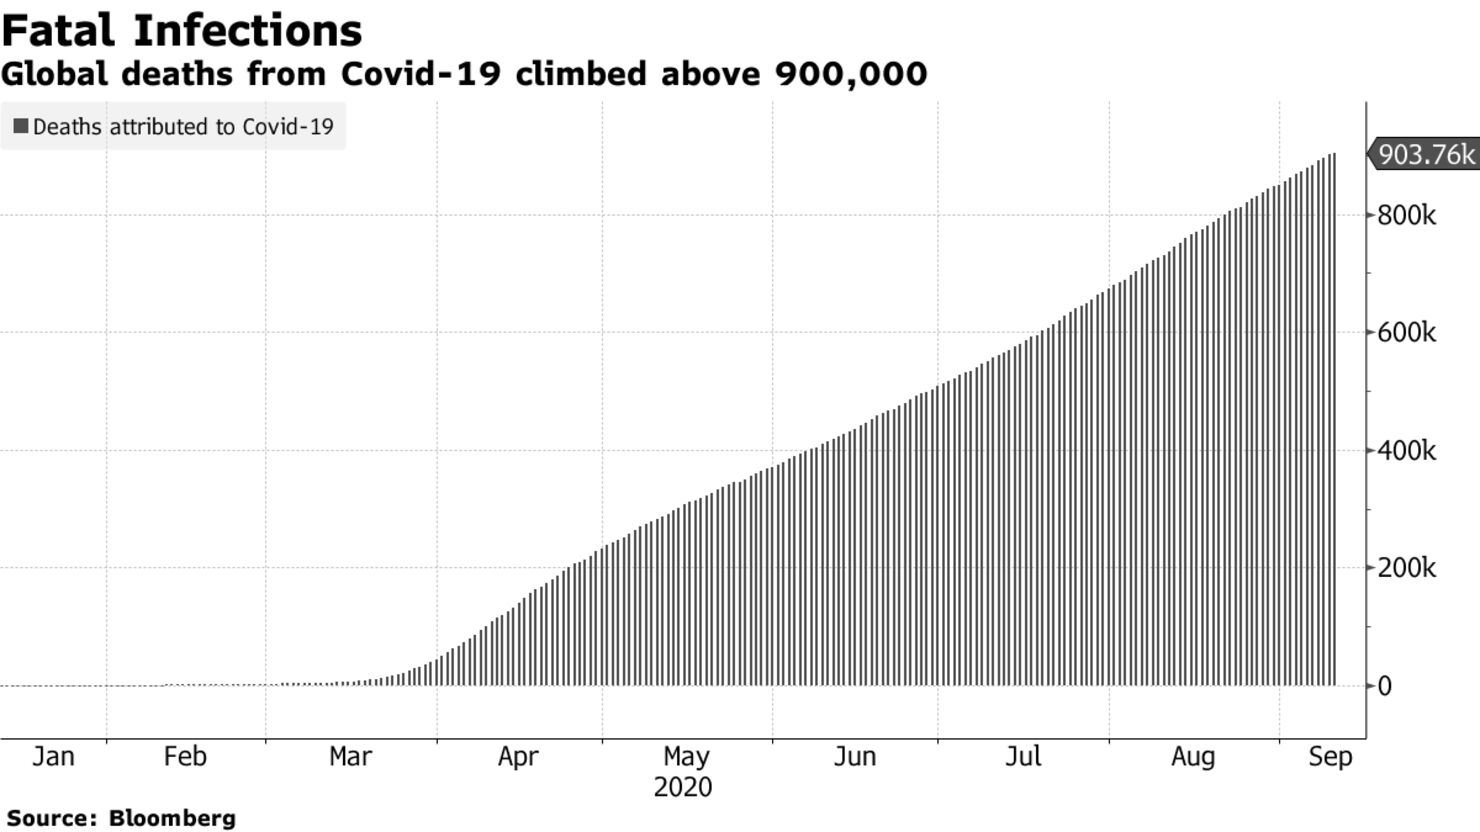 Global deaths from Covid-19 climbed above 900,000